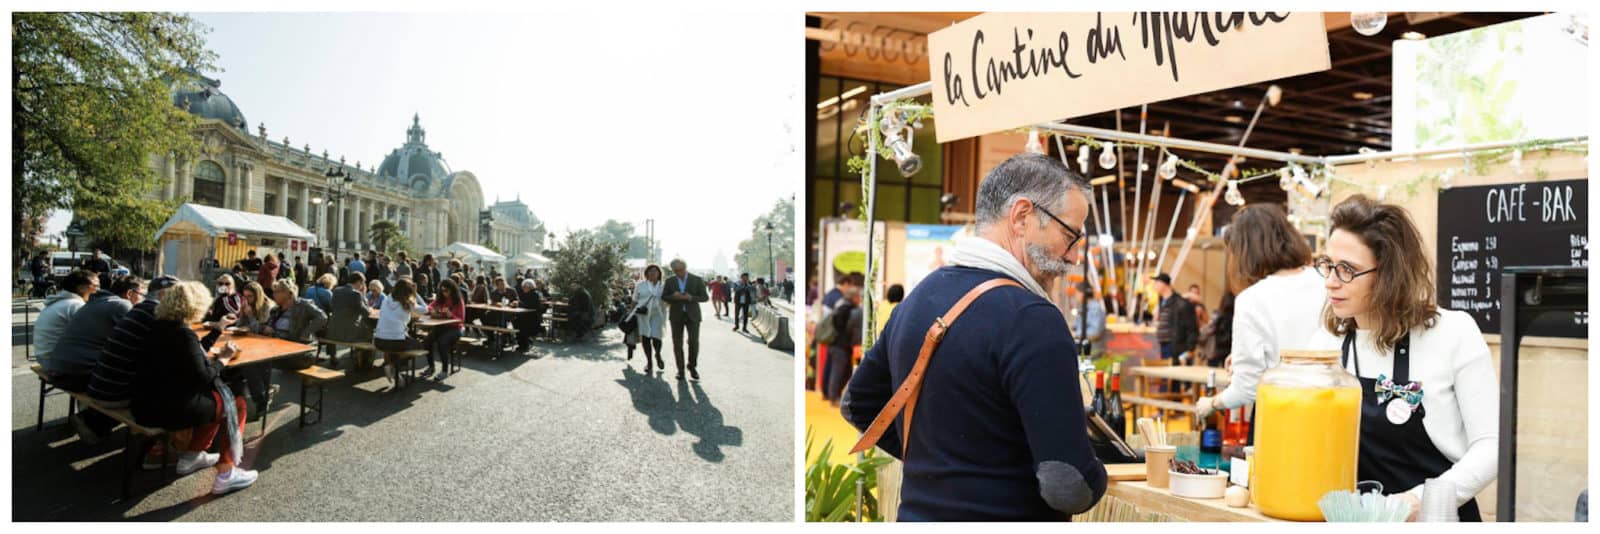 Sustainable eating in Paris at La Cantine du Marché's tables oustide the Grand Palais Museum in the sunshine (left). A waitress serving a male customer at the counter (right).